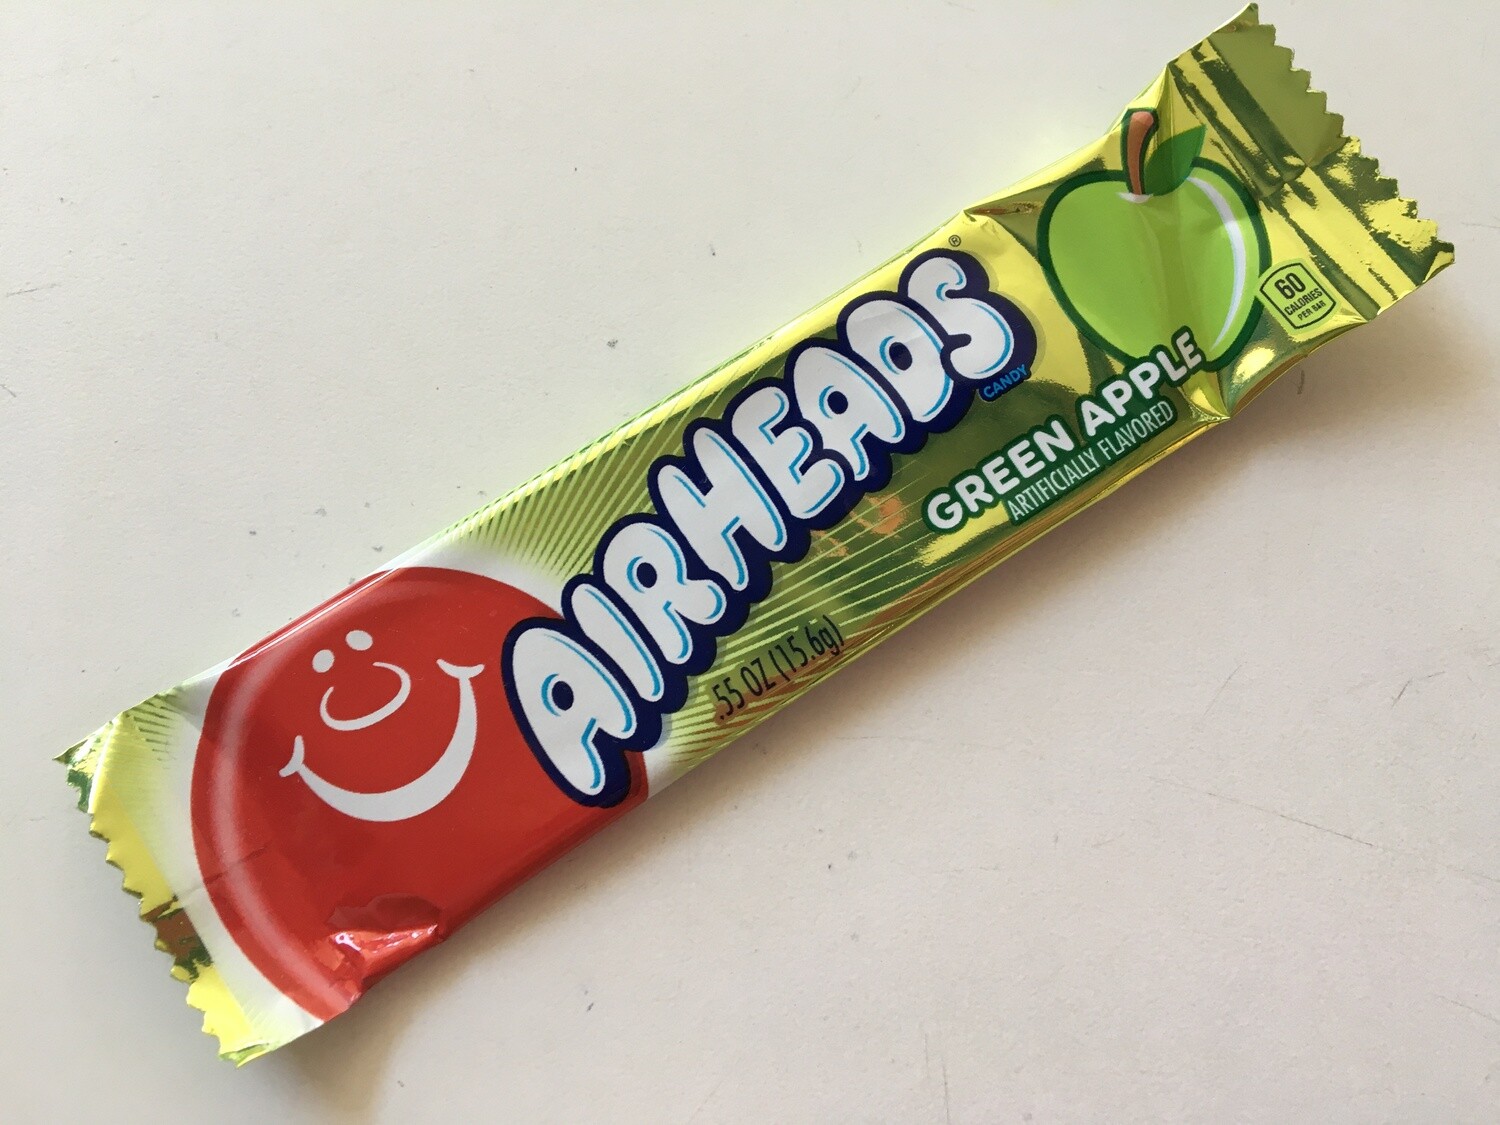 Candy / 25-Cent Candy / Airheads, Green Apple